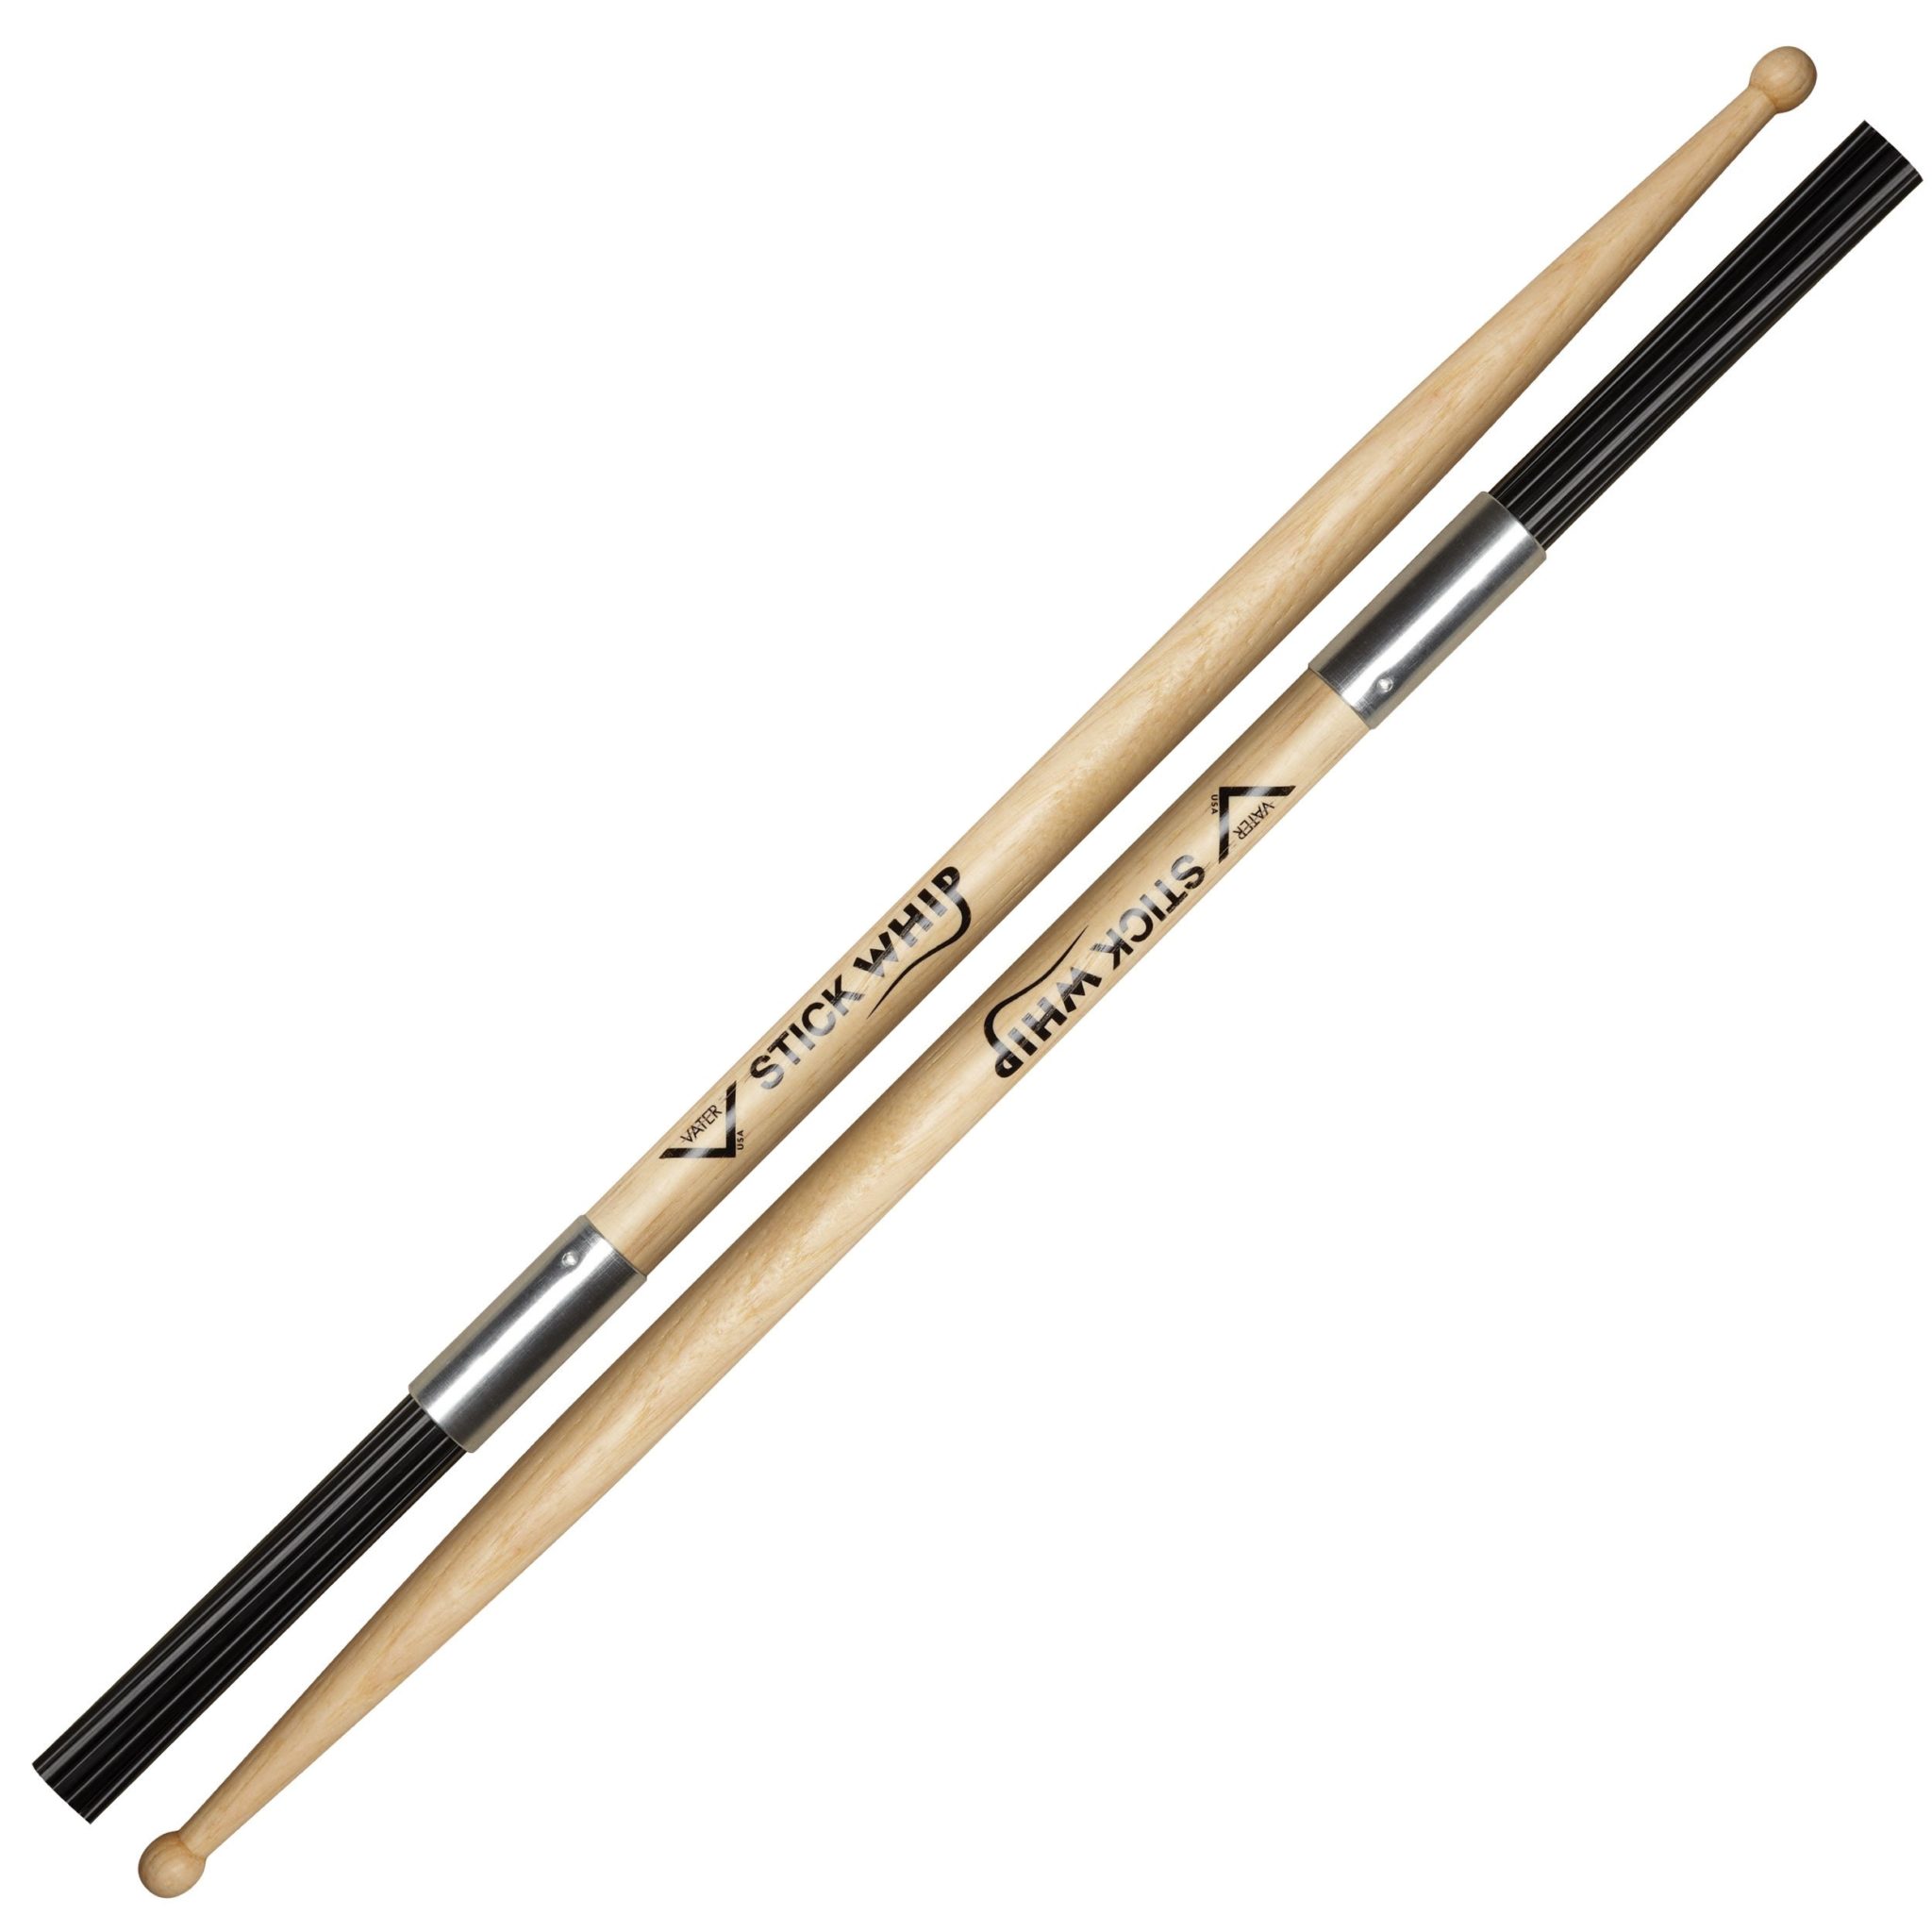 Drummers　Vater　Stick　Sticks　Whip　Combi　Only